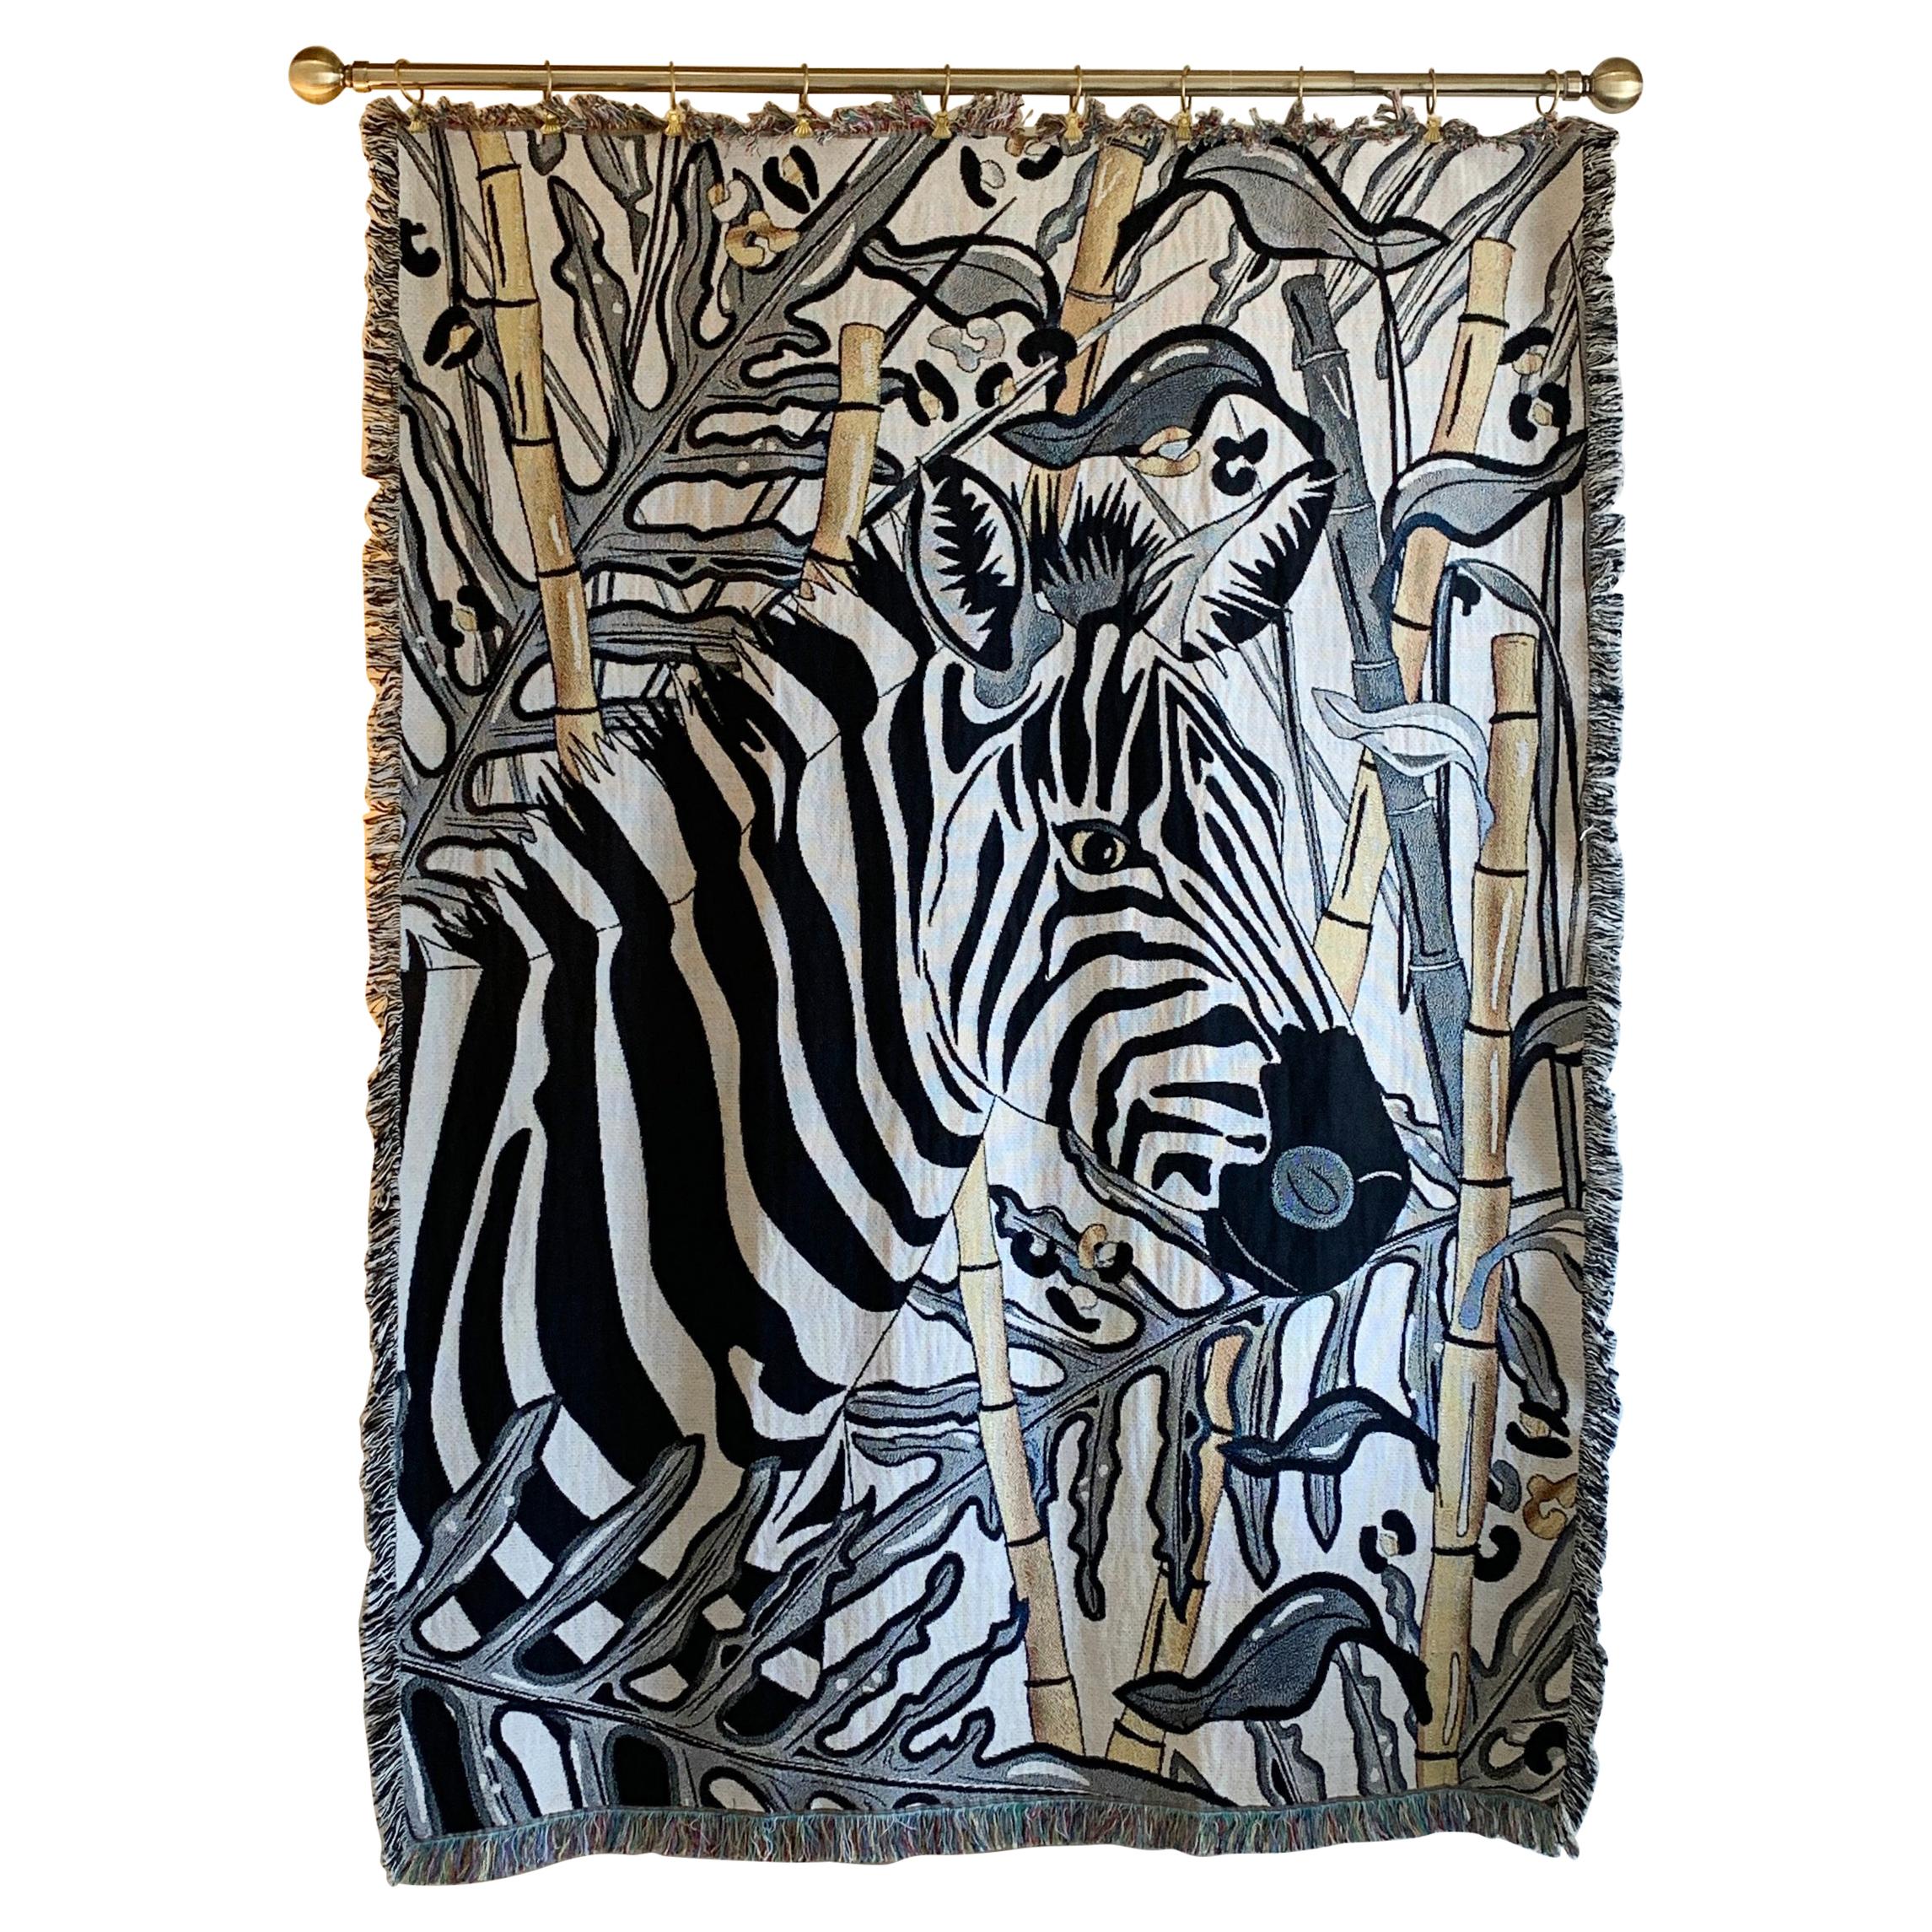 The Tropics Collection 'Zebra' Woven Throw Monochrome and Gold For Sale